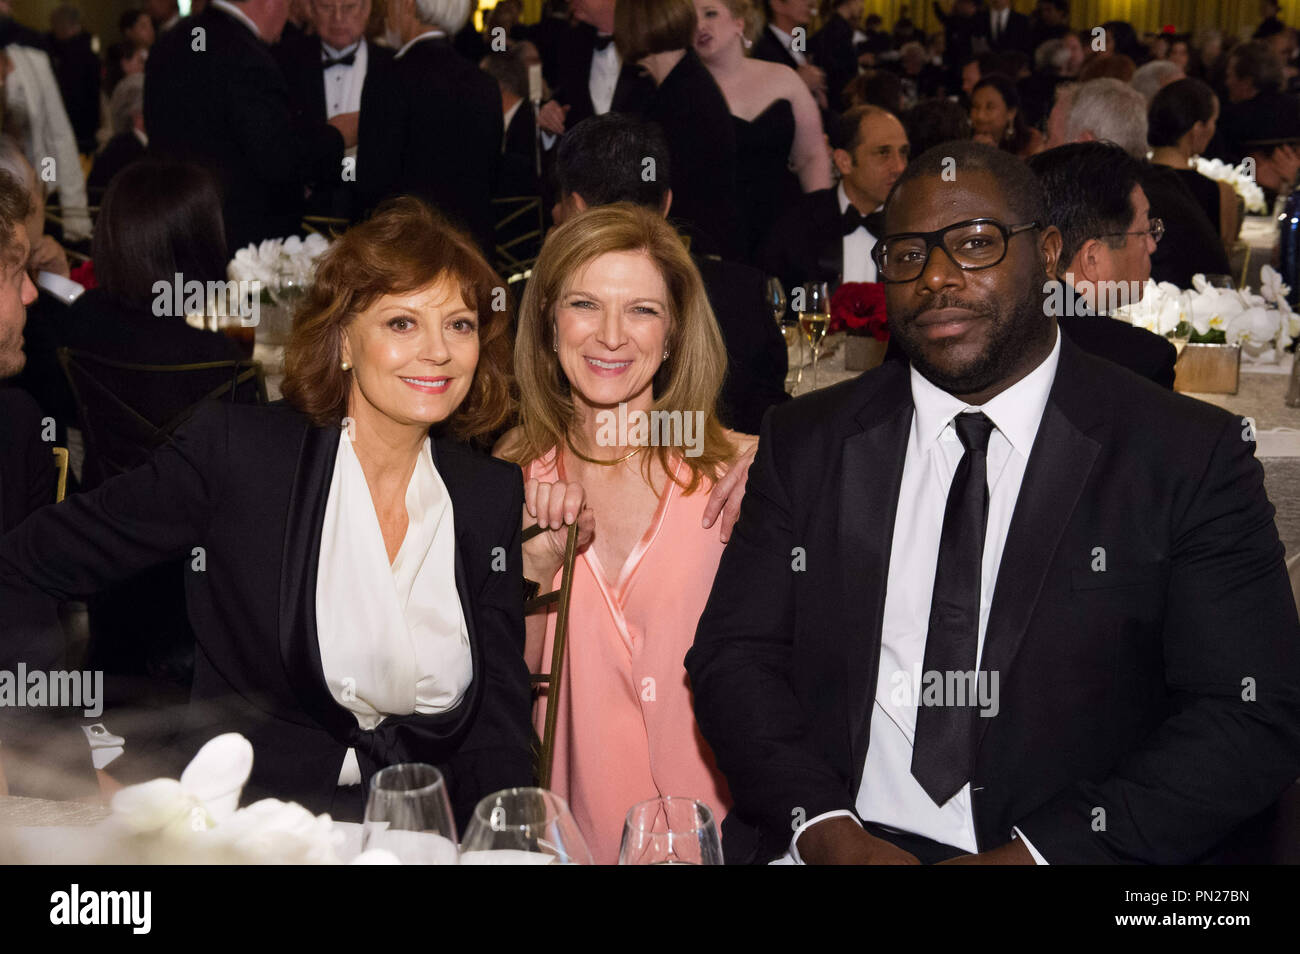 Susan Sarandon (left), Dawn Hudson (center) and Steve McQueen attend the 6th Annual Governors Awards in The Ray Dolby Ballroom at Hollywood & Highland Center® in Hollywood, CA, on Saturday, November 8, 2014.  File Reference # 32487 160THA  For Editorial Use Only -  All Rights Reserved Stock Photo